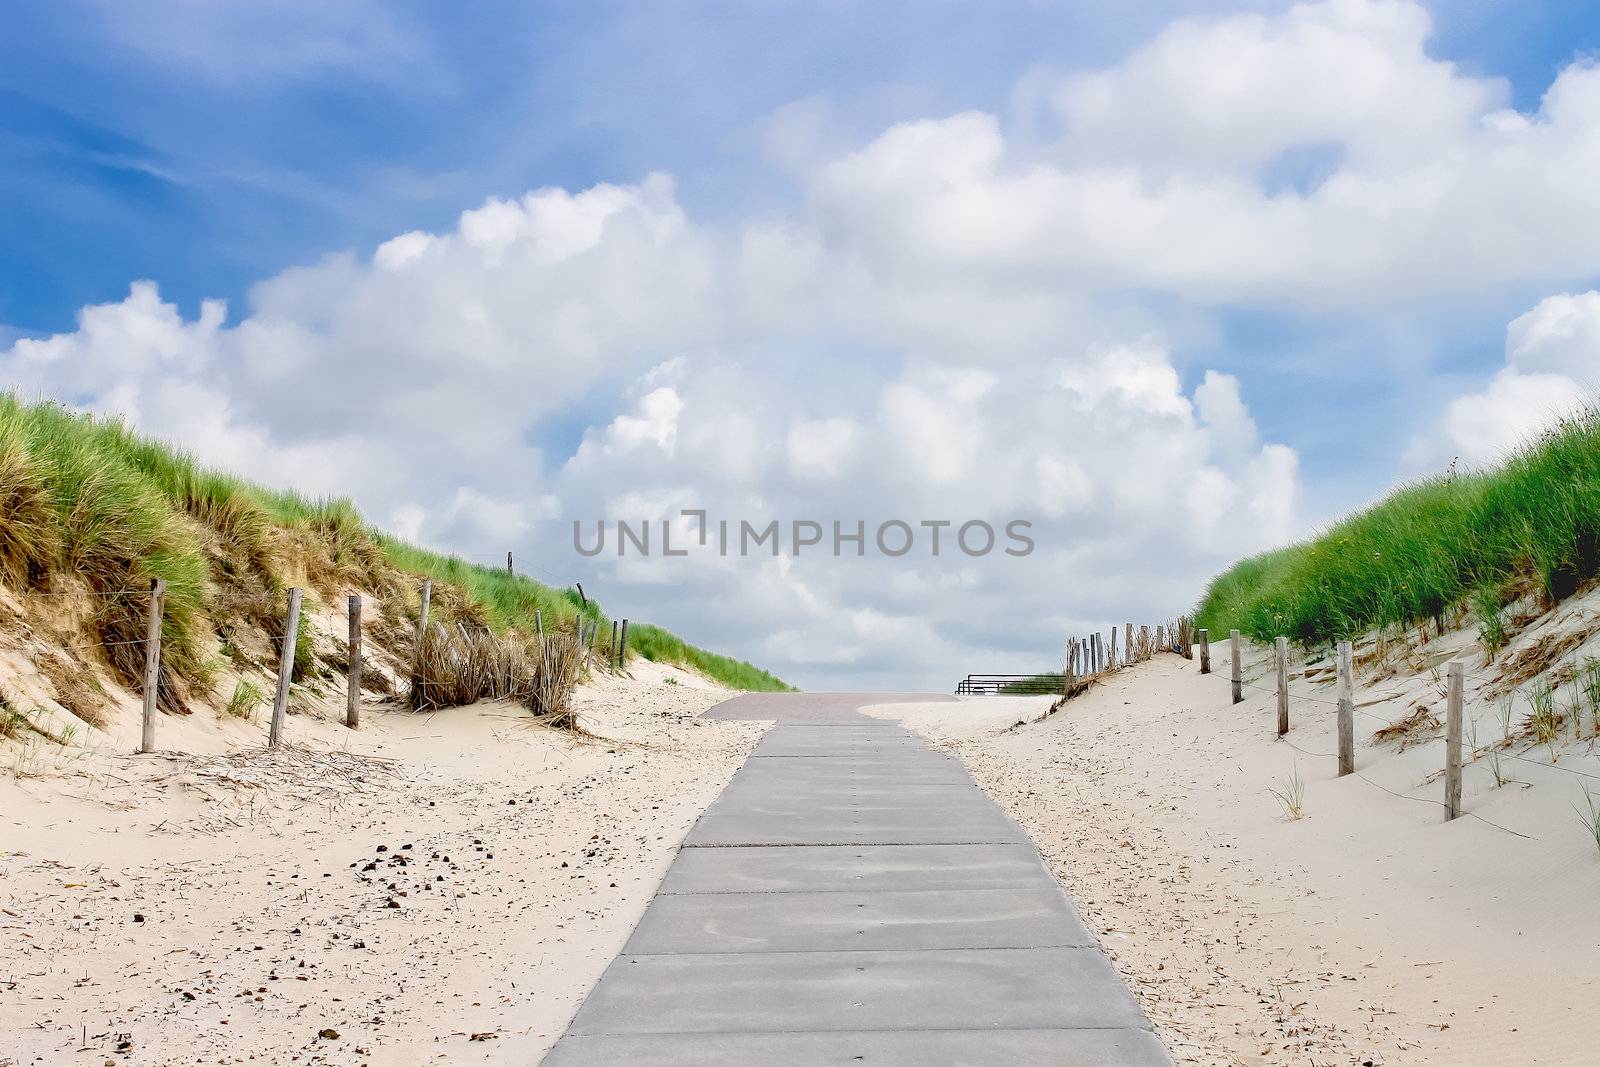 The road in dunes to the beach. Netherlands by NickNick